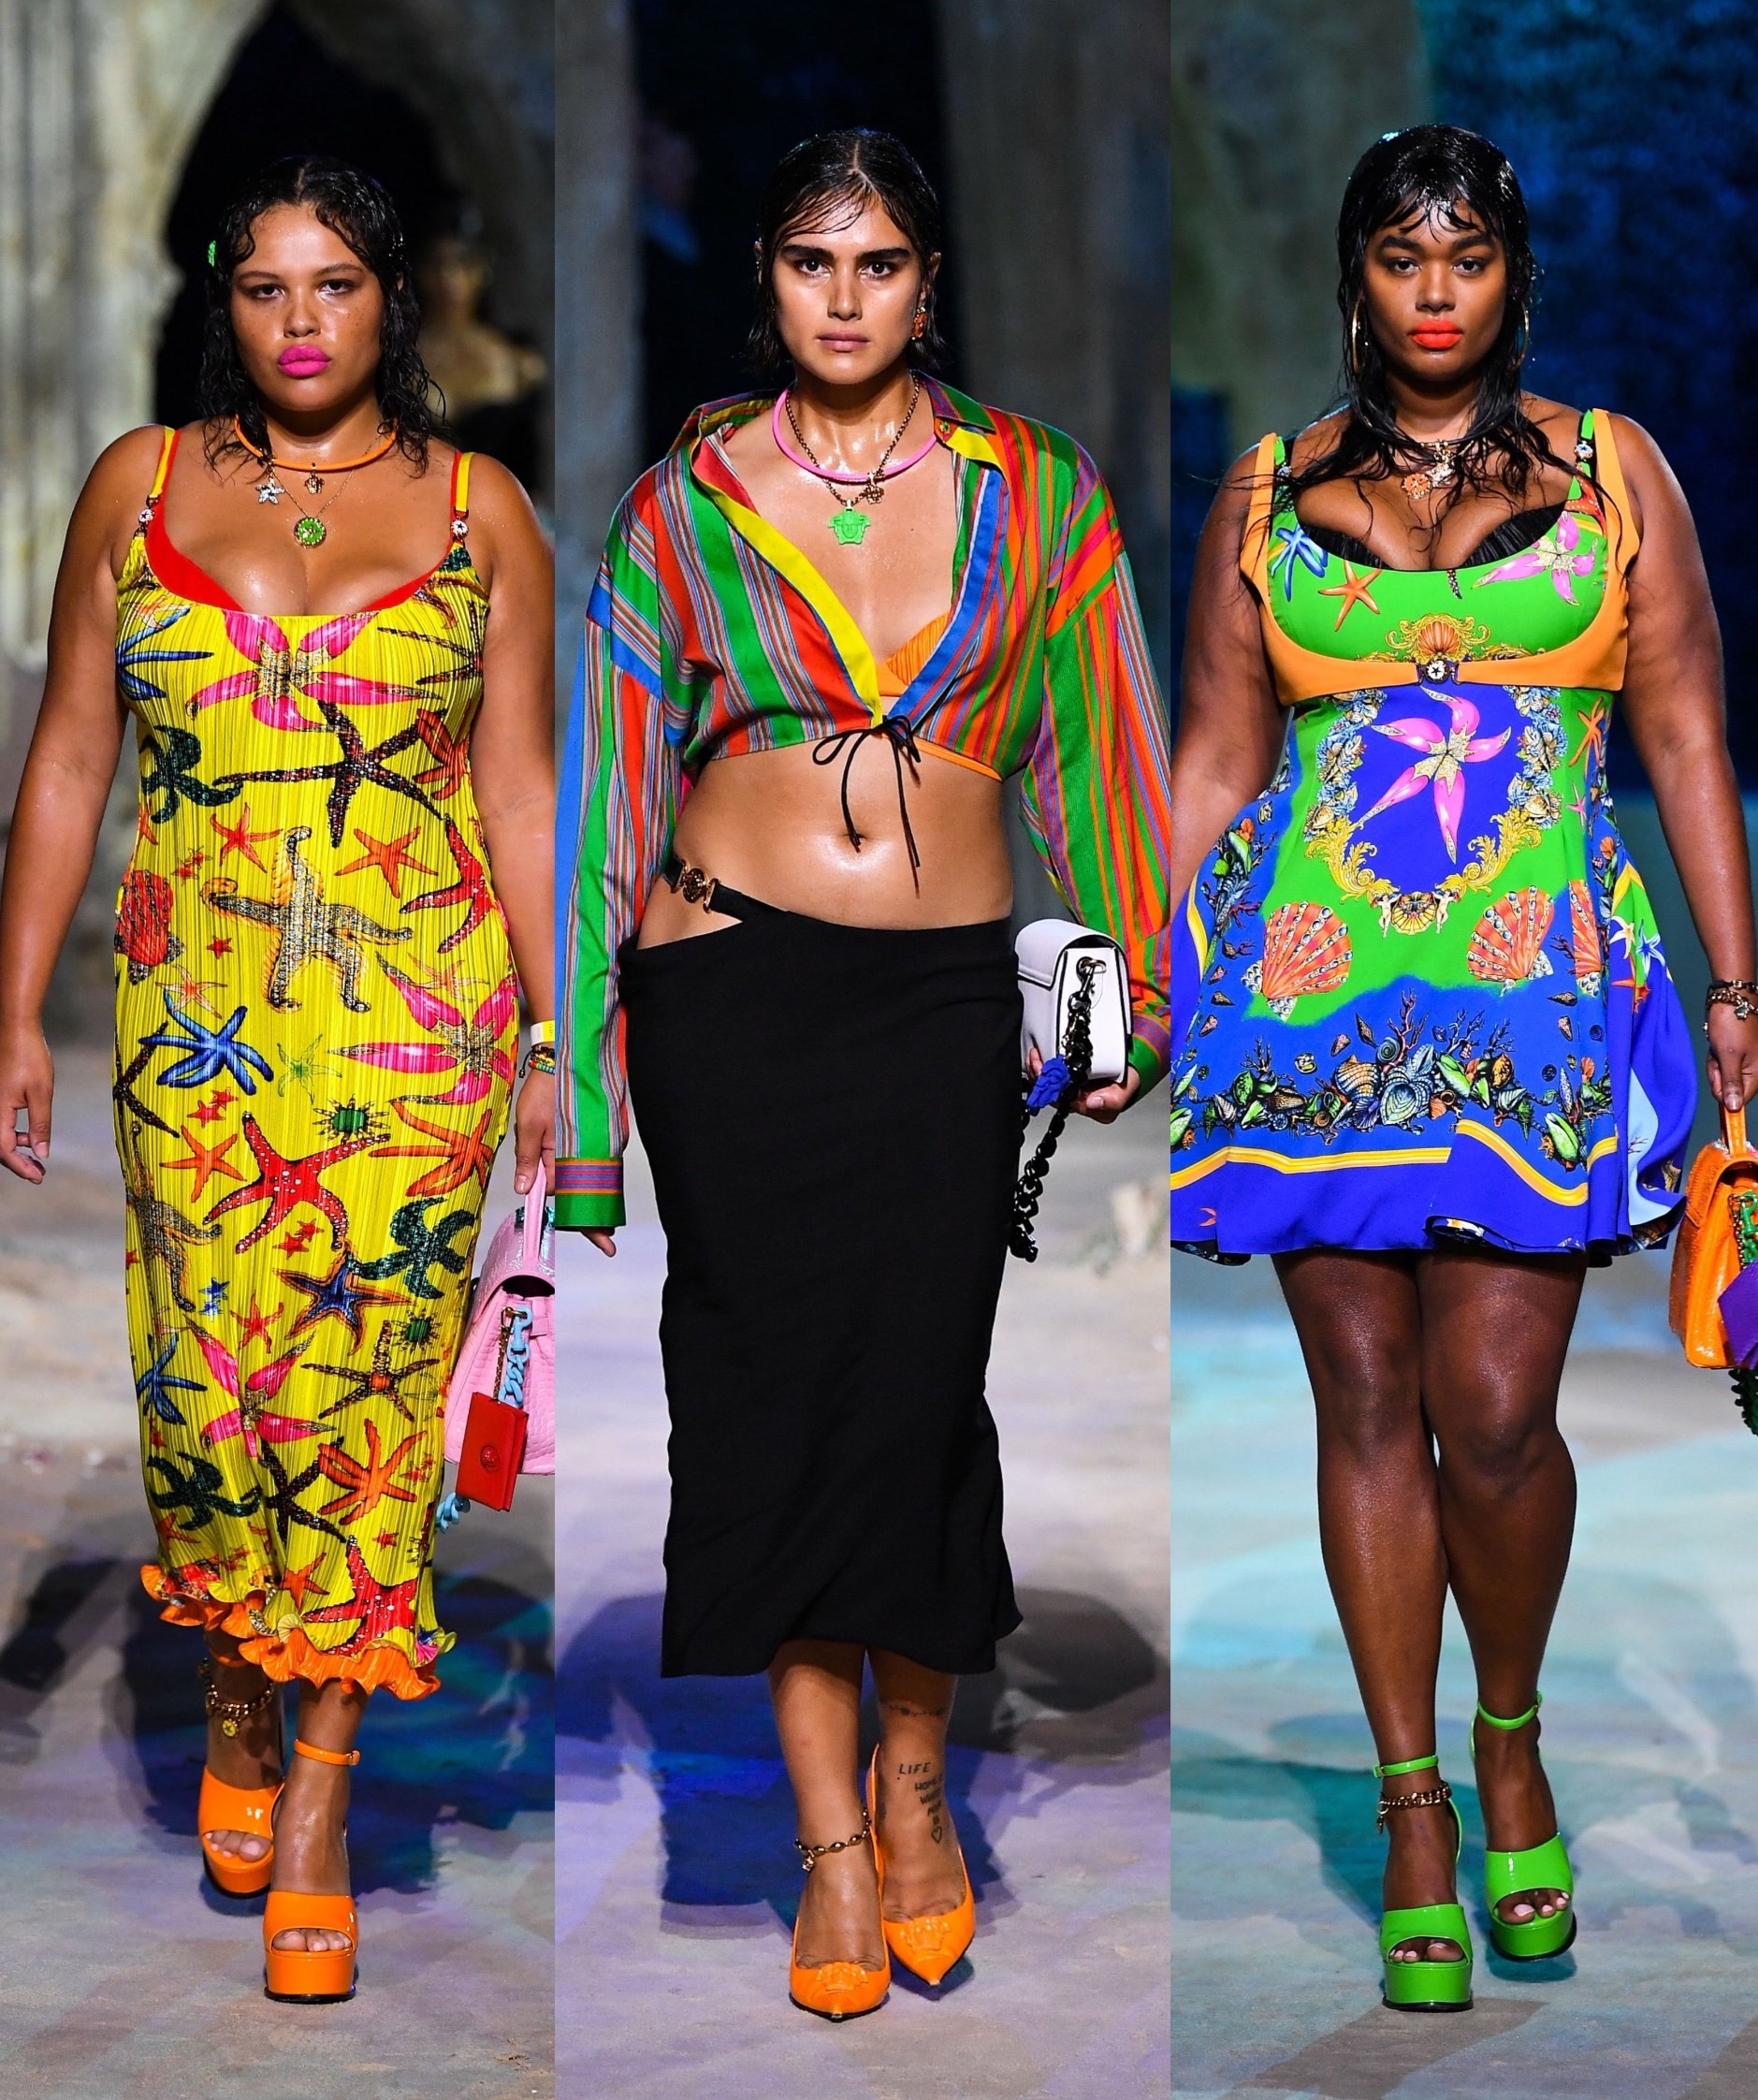 Three plus-size models just made fashion history at Versace